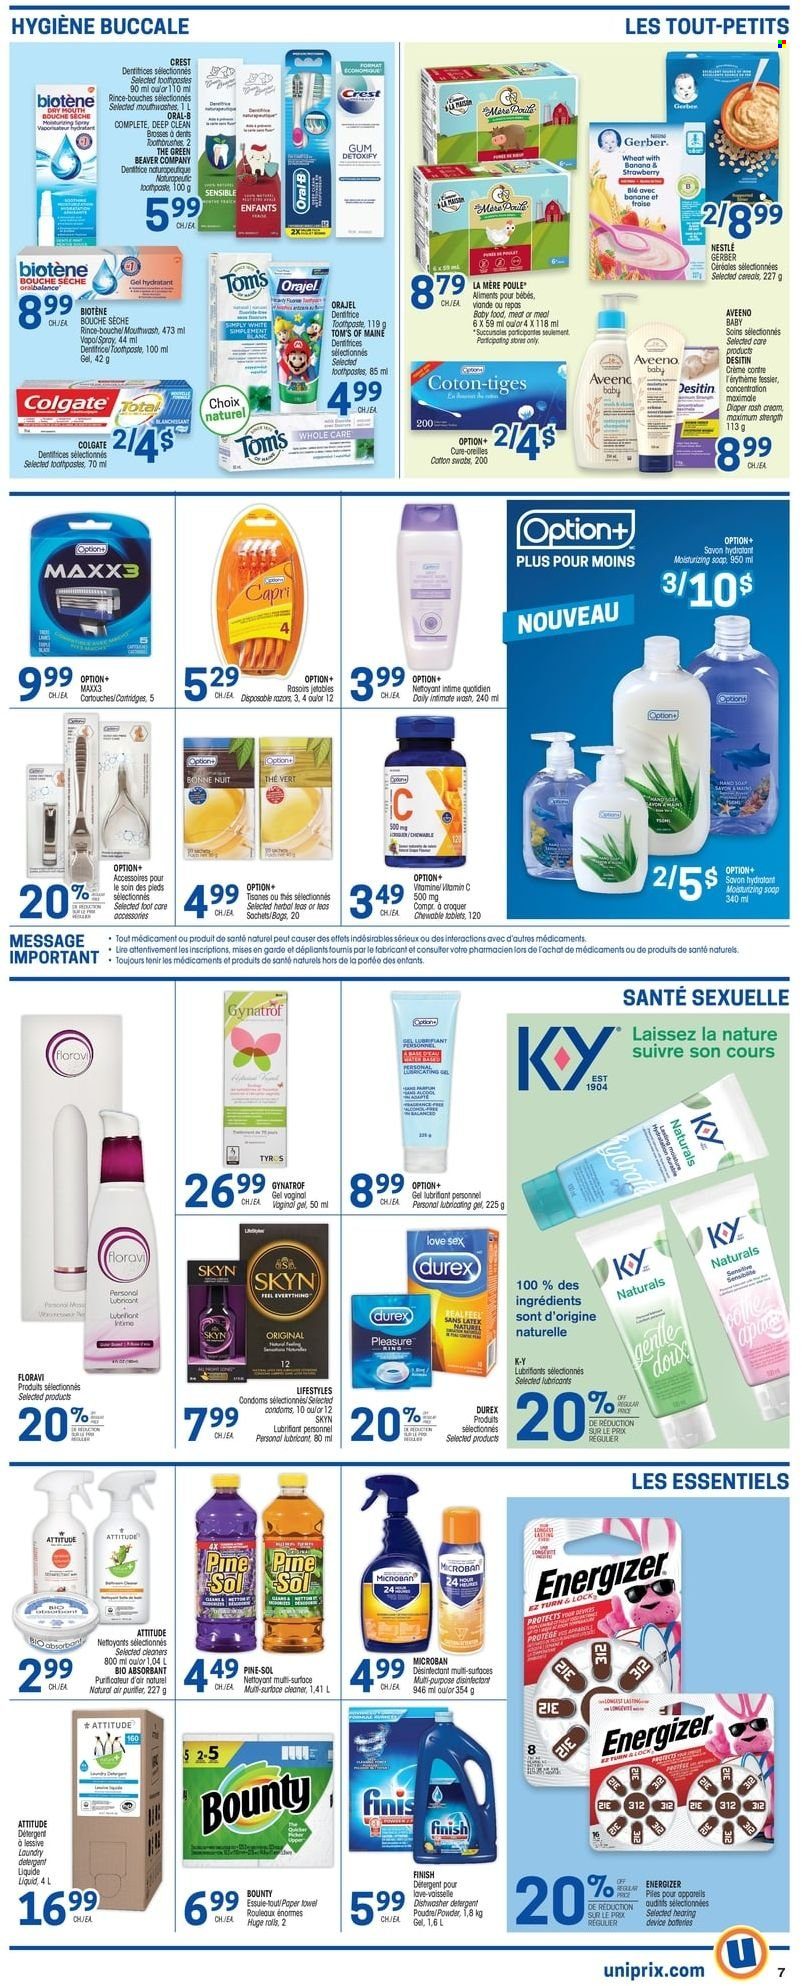 thumbnail - Uniprix Flyer - January 20, 2022 - January 26, 2022 - Sales products - Bounty, Gerber, cereals, Aveeno, cleaner, Pine-Sol, soap, Biotene, toothpaste, mouthwash, Crest, foot care, vitamin c, Desitin, Nestlé, detergent, Energizer, Colgate, Oral-B. Page 6.